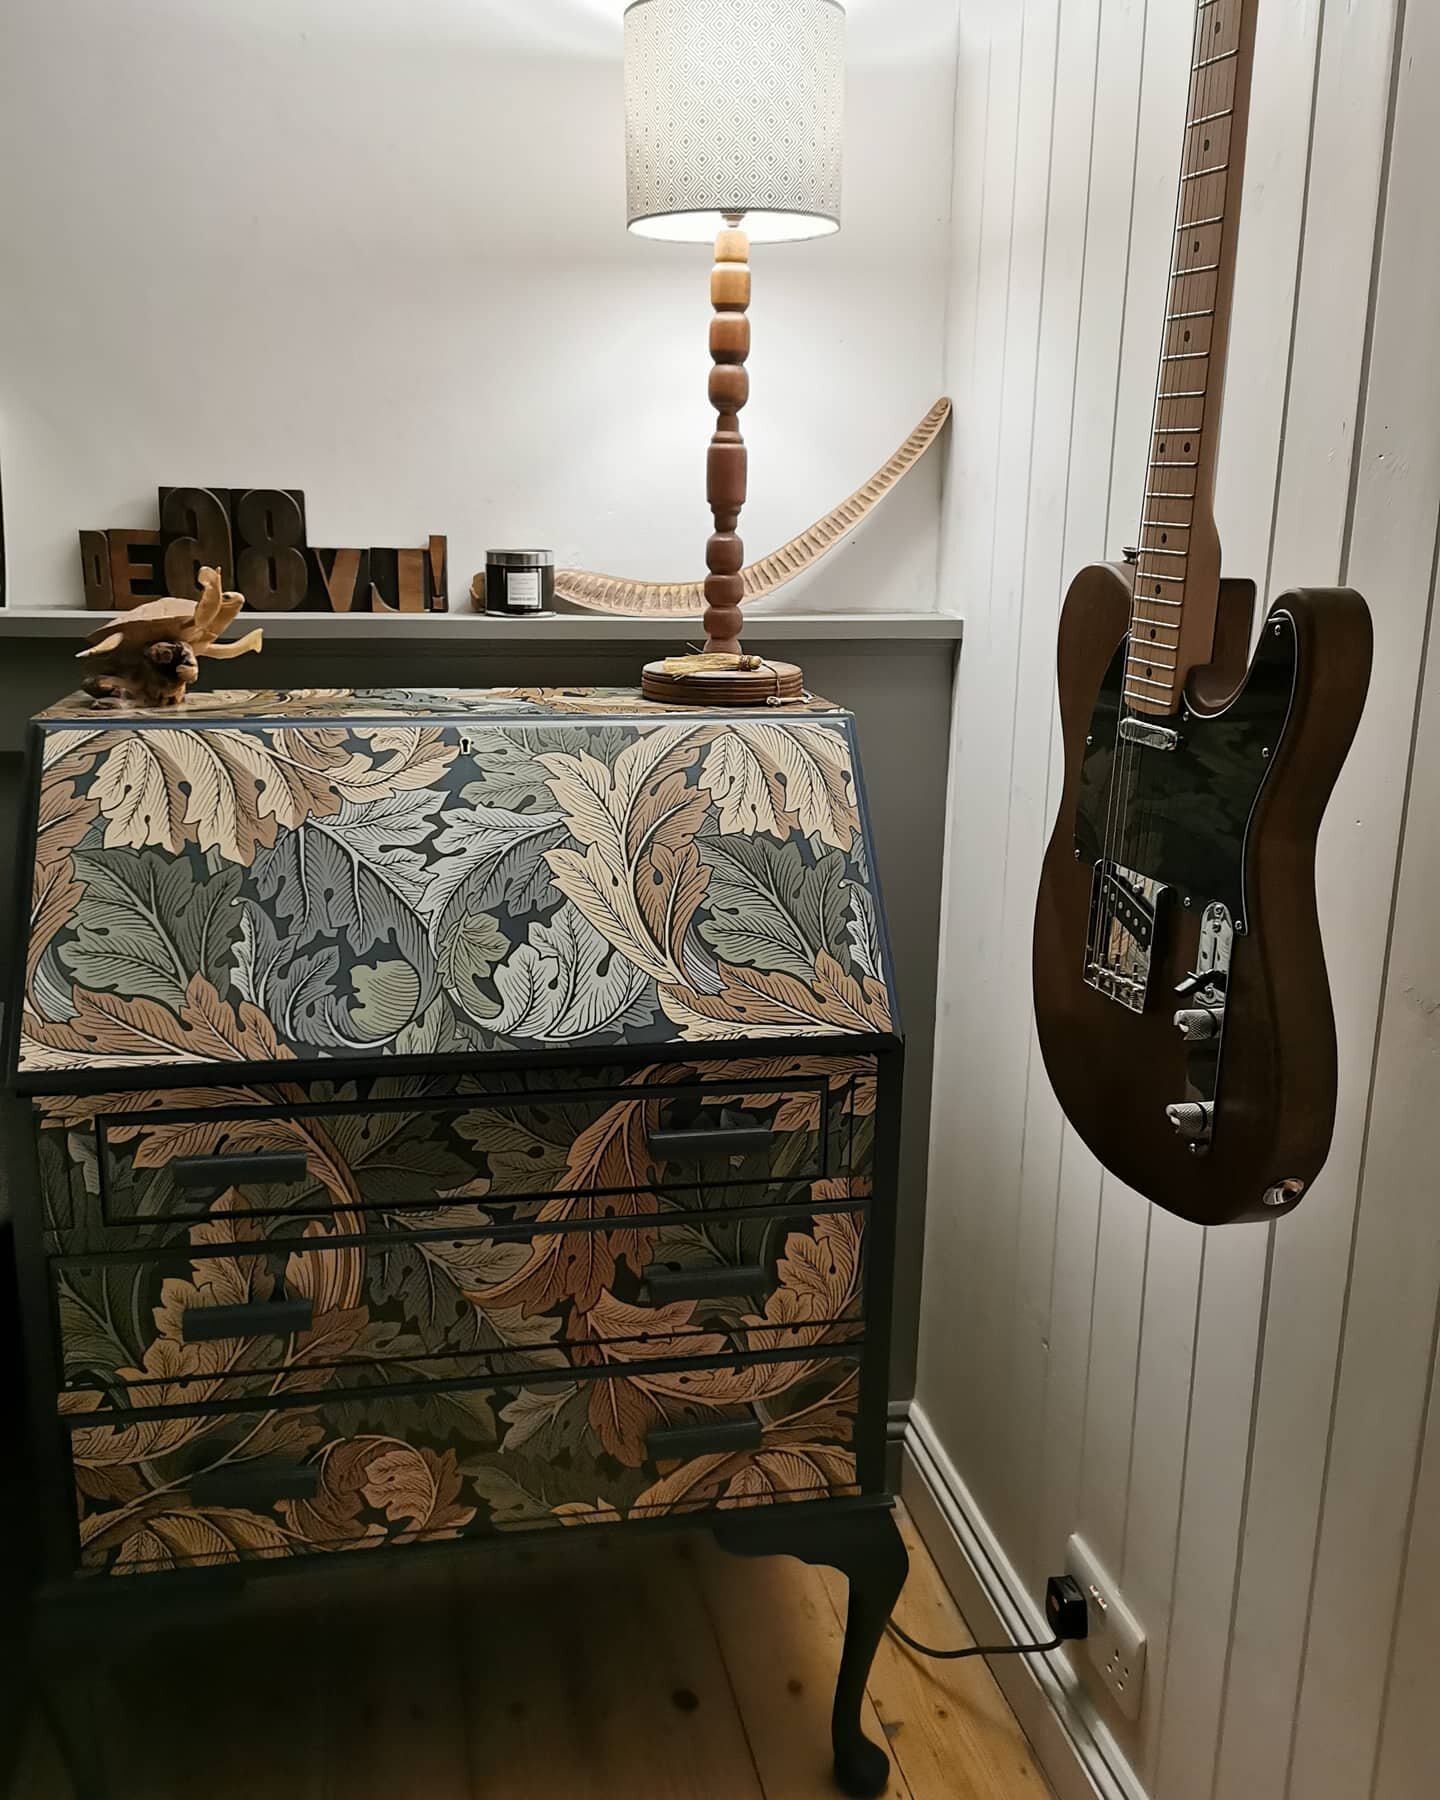 Collecting unique furniture pieces over time really helps add character to any home. This beautiful restored bureau in William Morris print by @thepheasantpluckerswife made its way to us last night and sits perfectly with the rest of the interior, ad